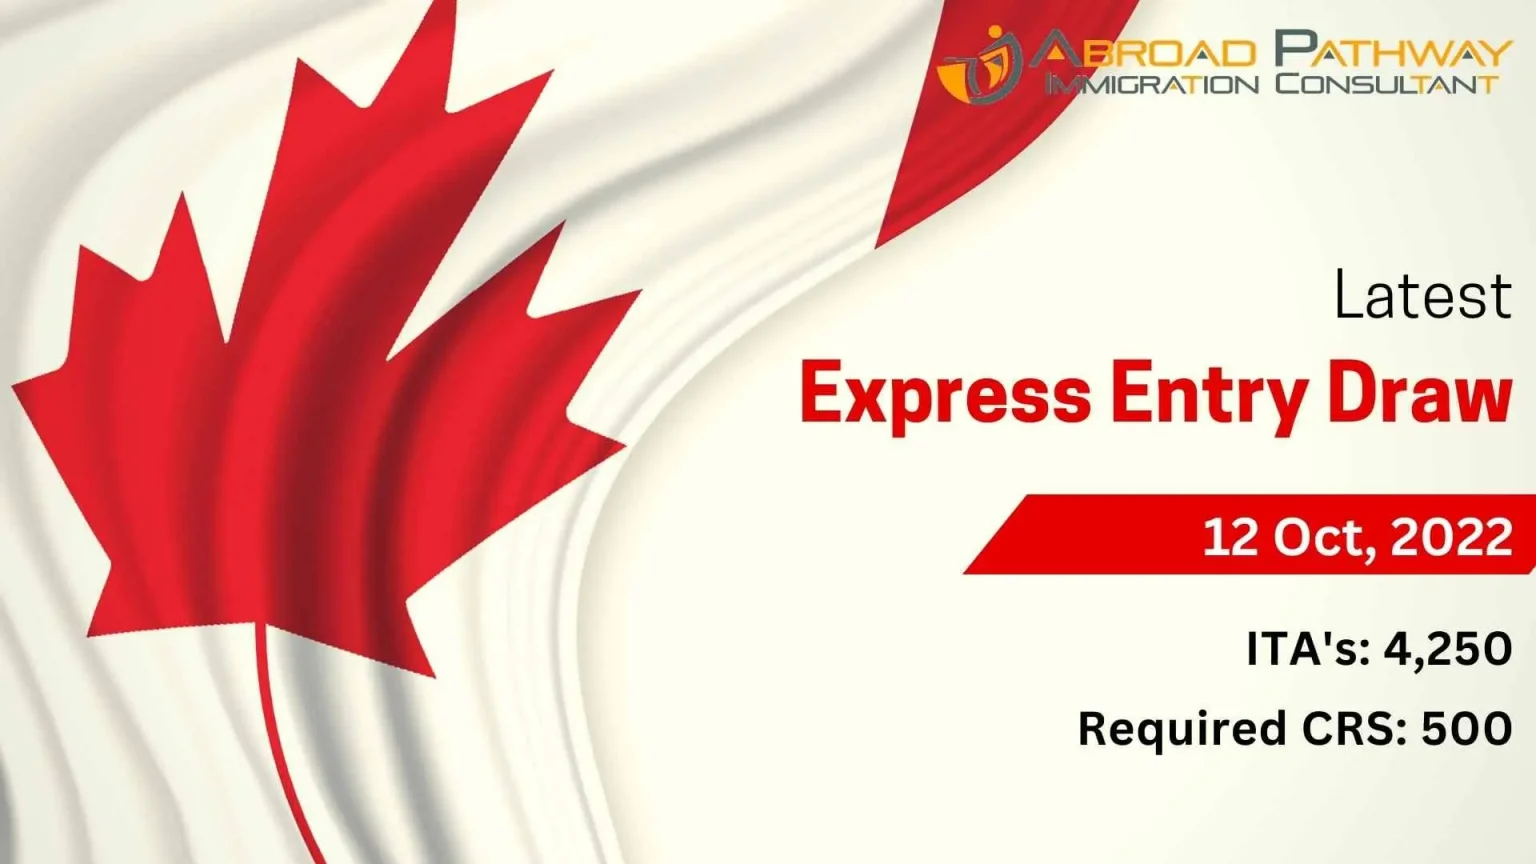 Canada all-program Express Entry draw invites 4,250 candidates